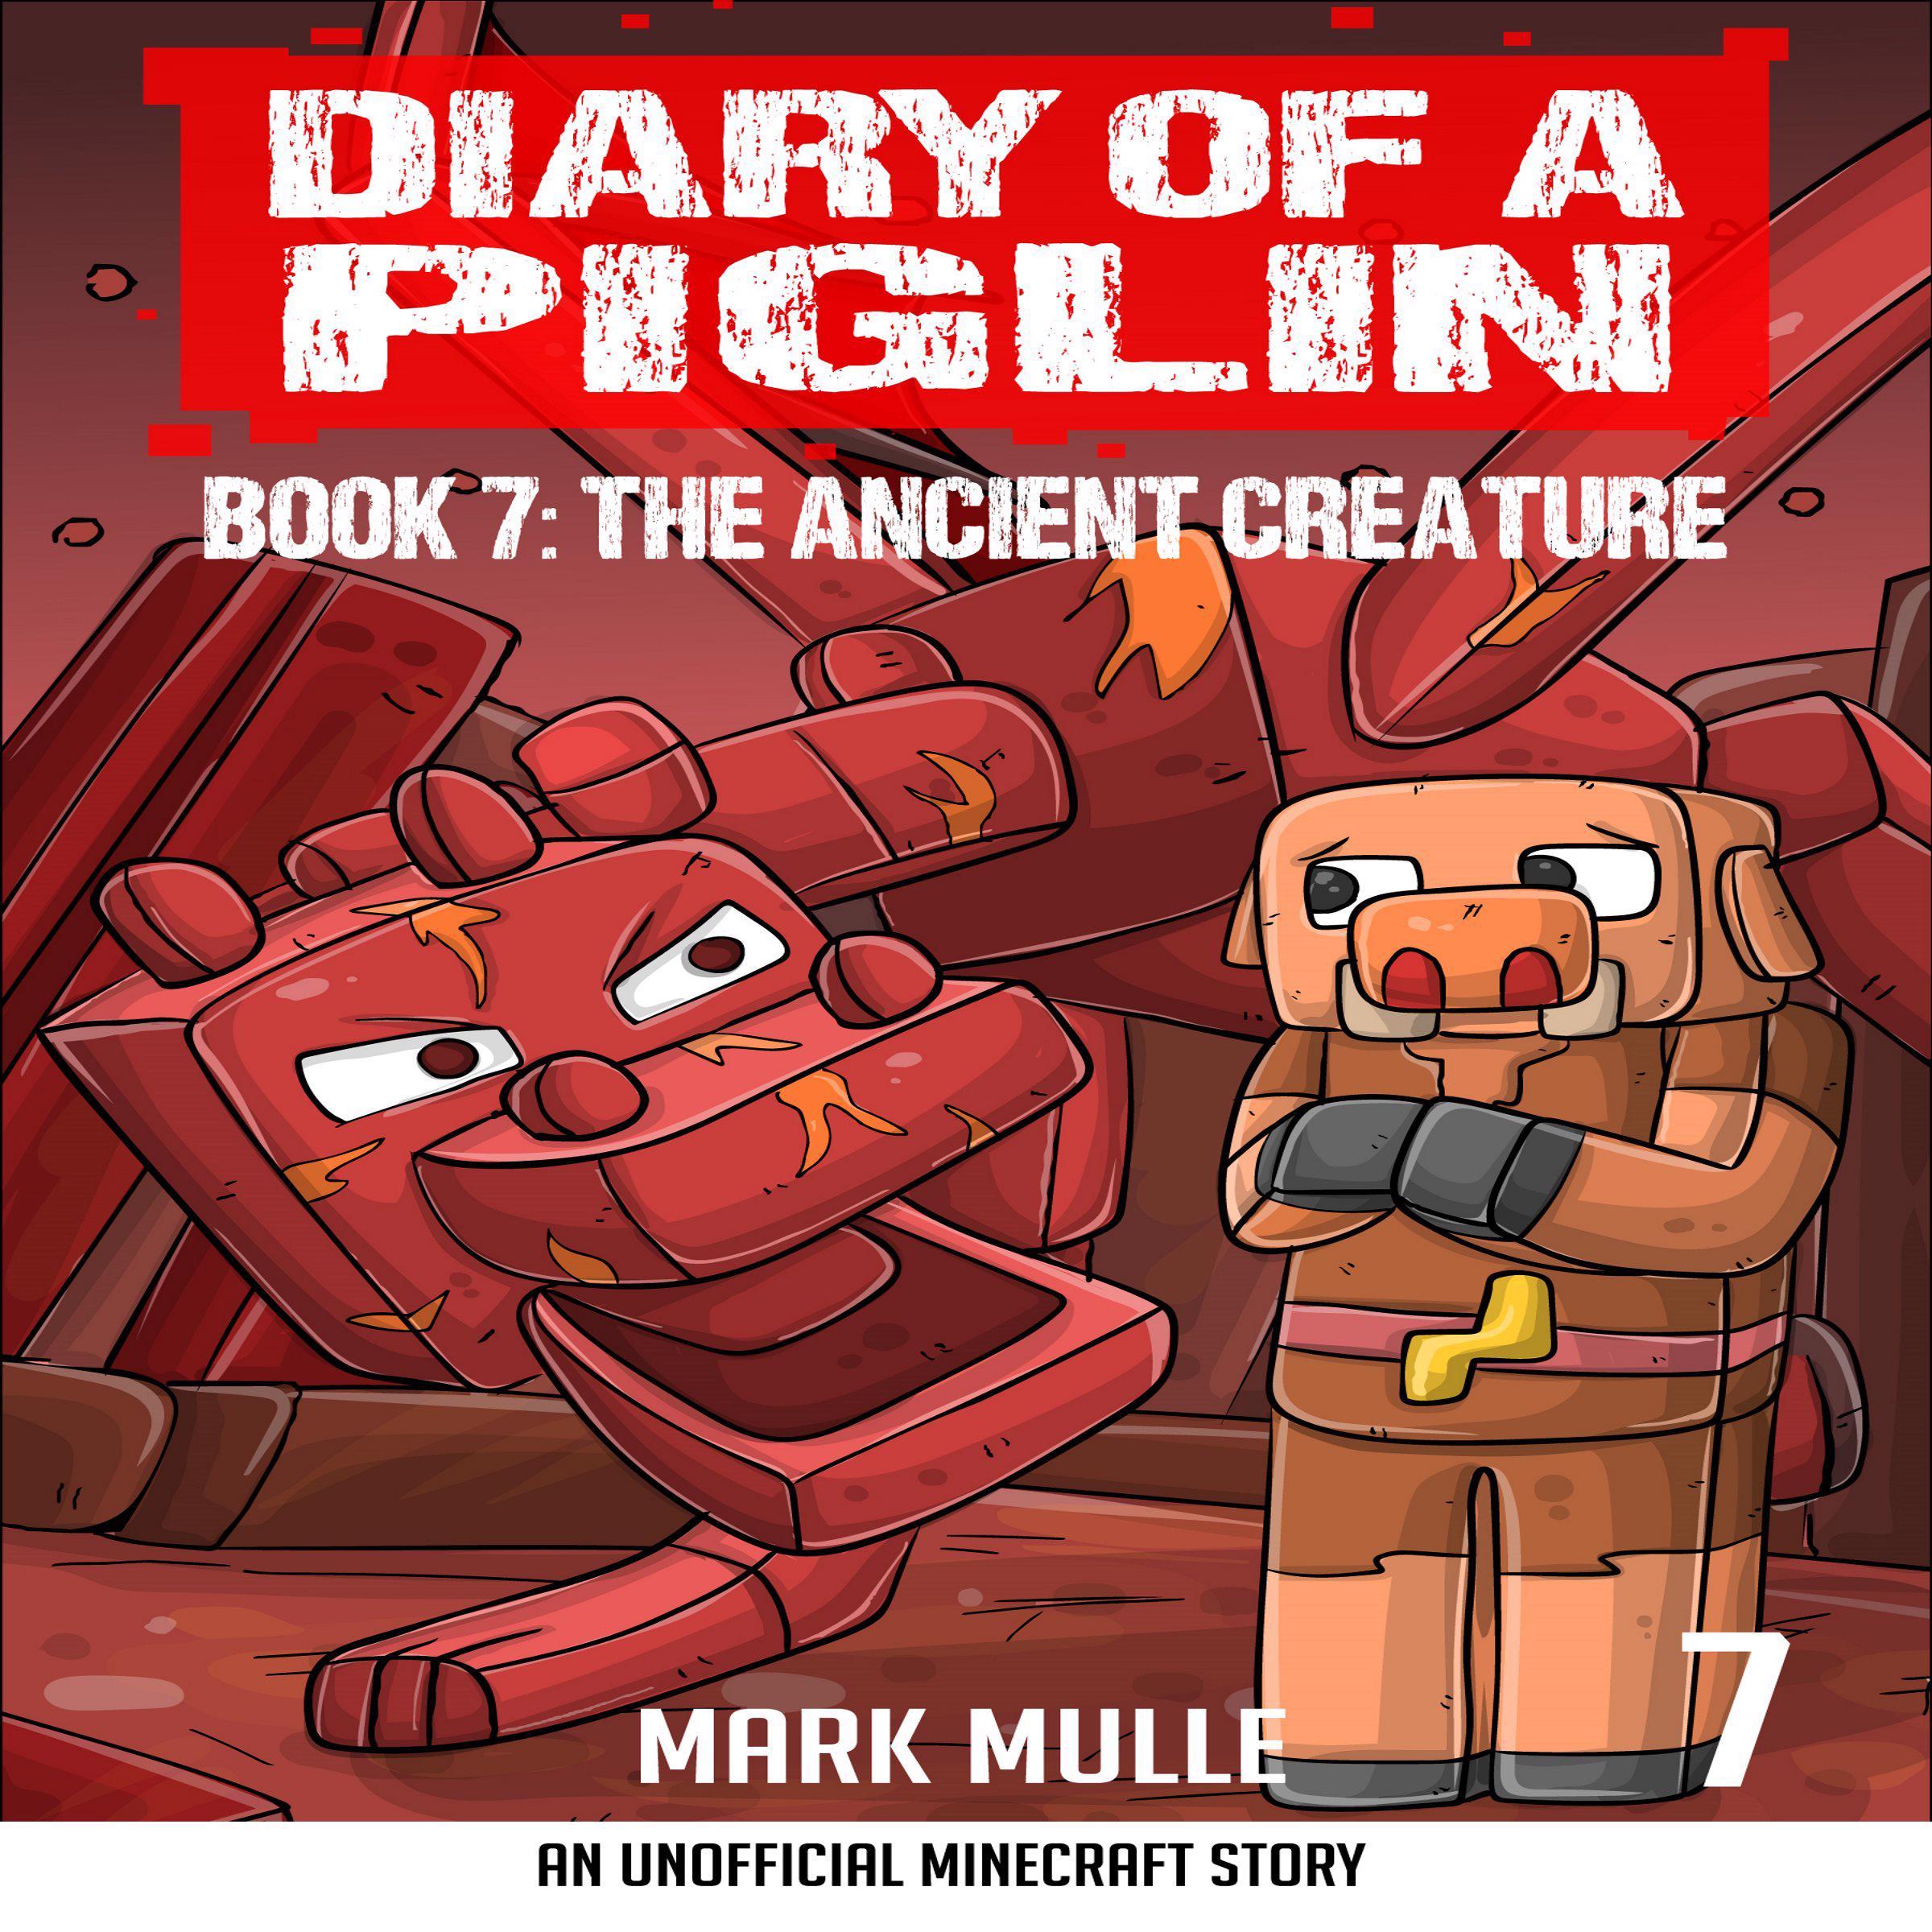 Diary of a Piglin Book 7